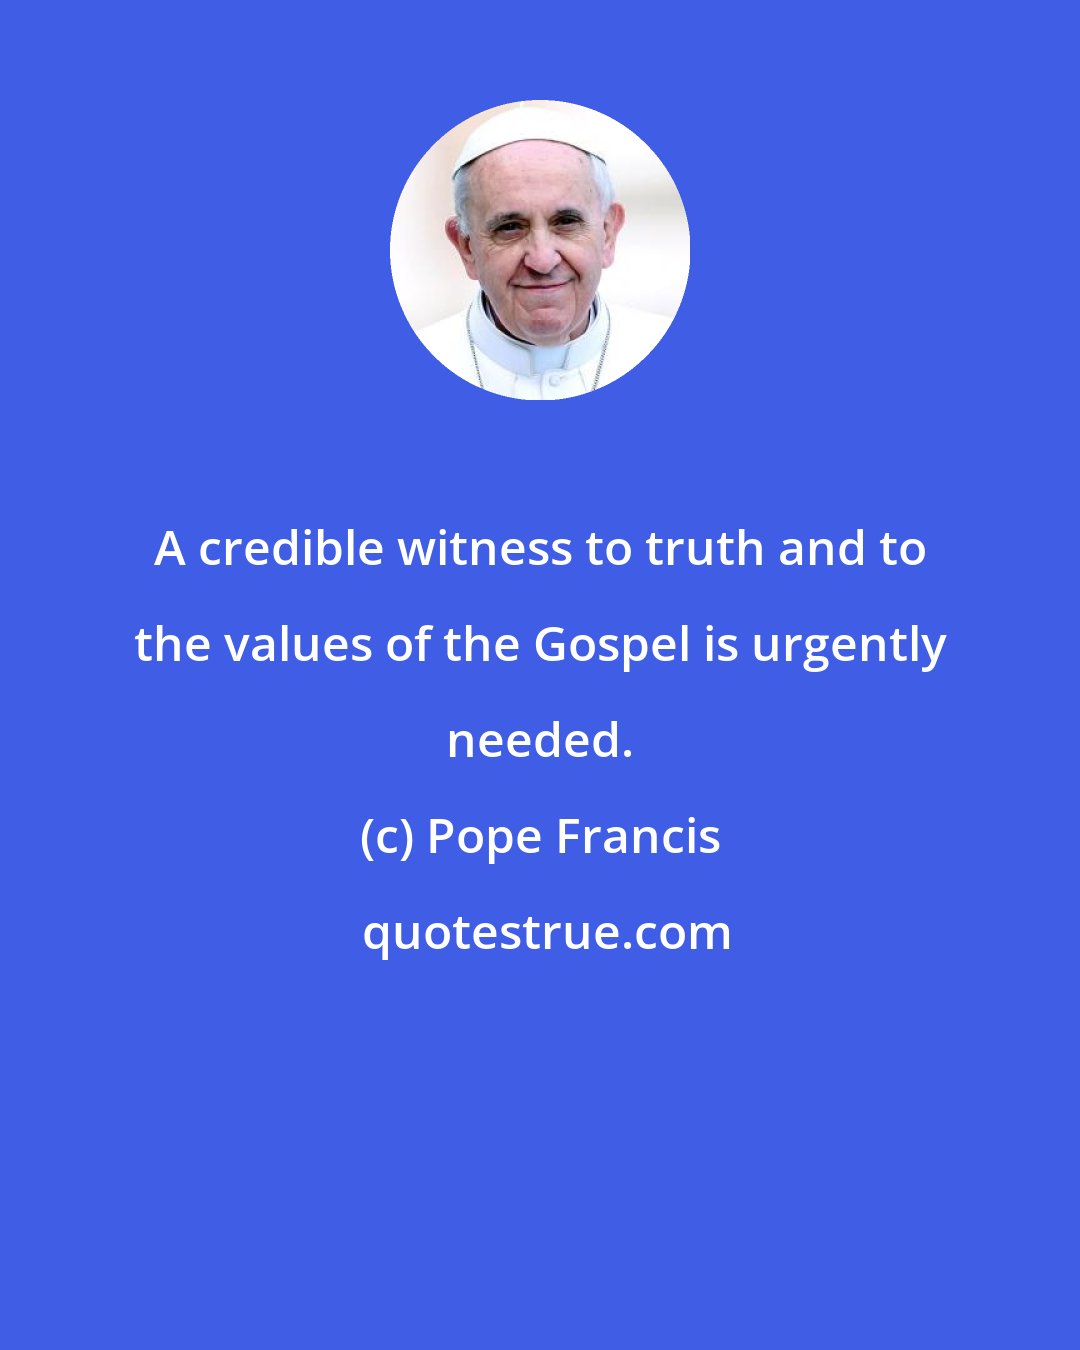 Pope Francis: A credible witness to truth and to the values of the Gospel is urgently needed.